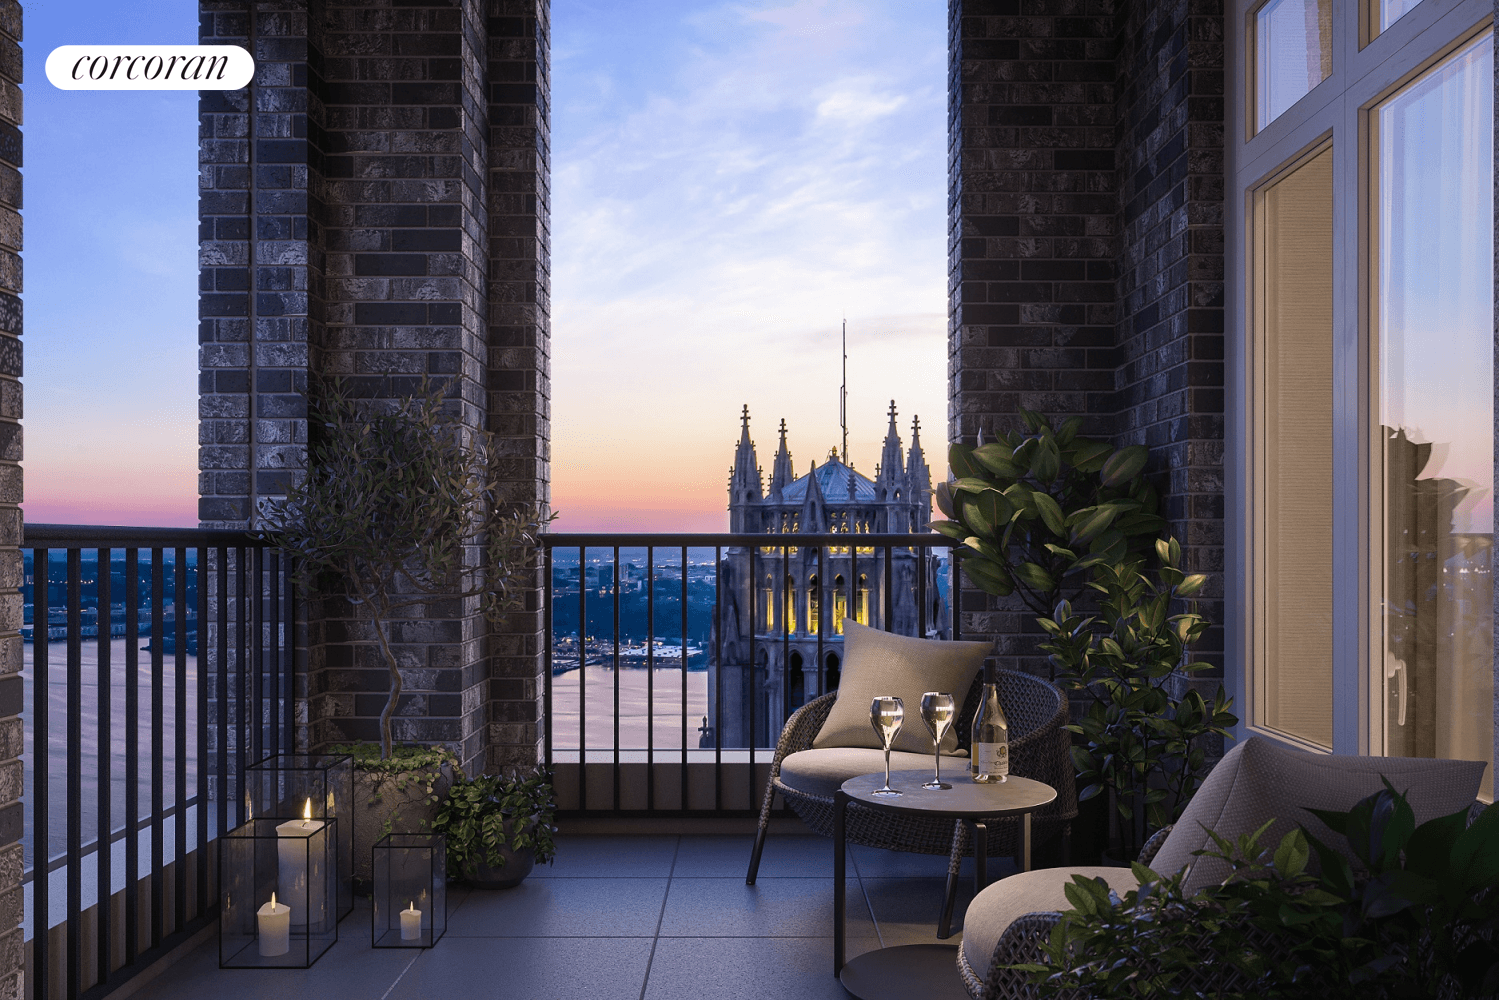 This three bedroom, two bathroom home with powder room offers sweeping northern and western views over the Hudson River, Riverside and Sakura Parks, and the iconic spire of Riverside Church.